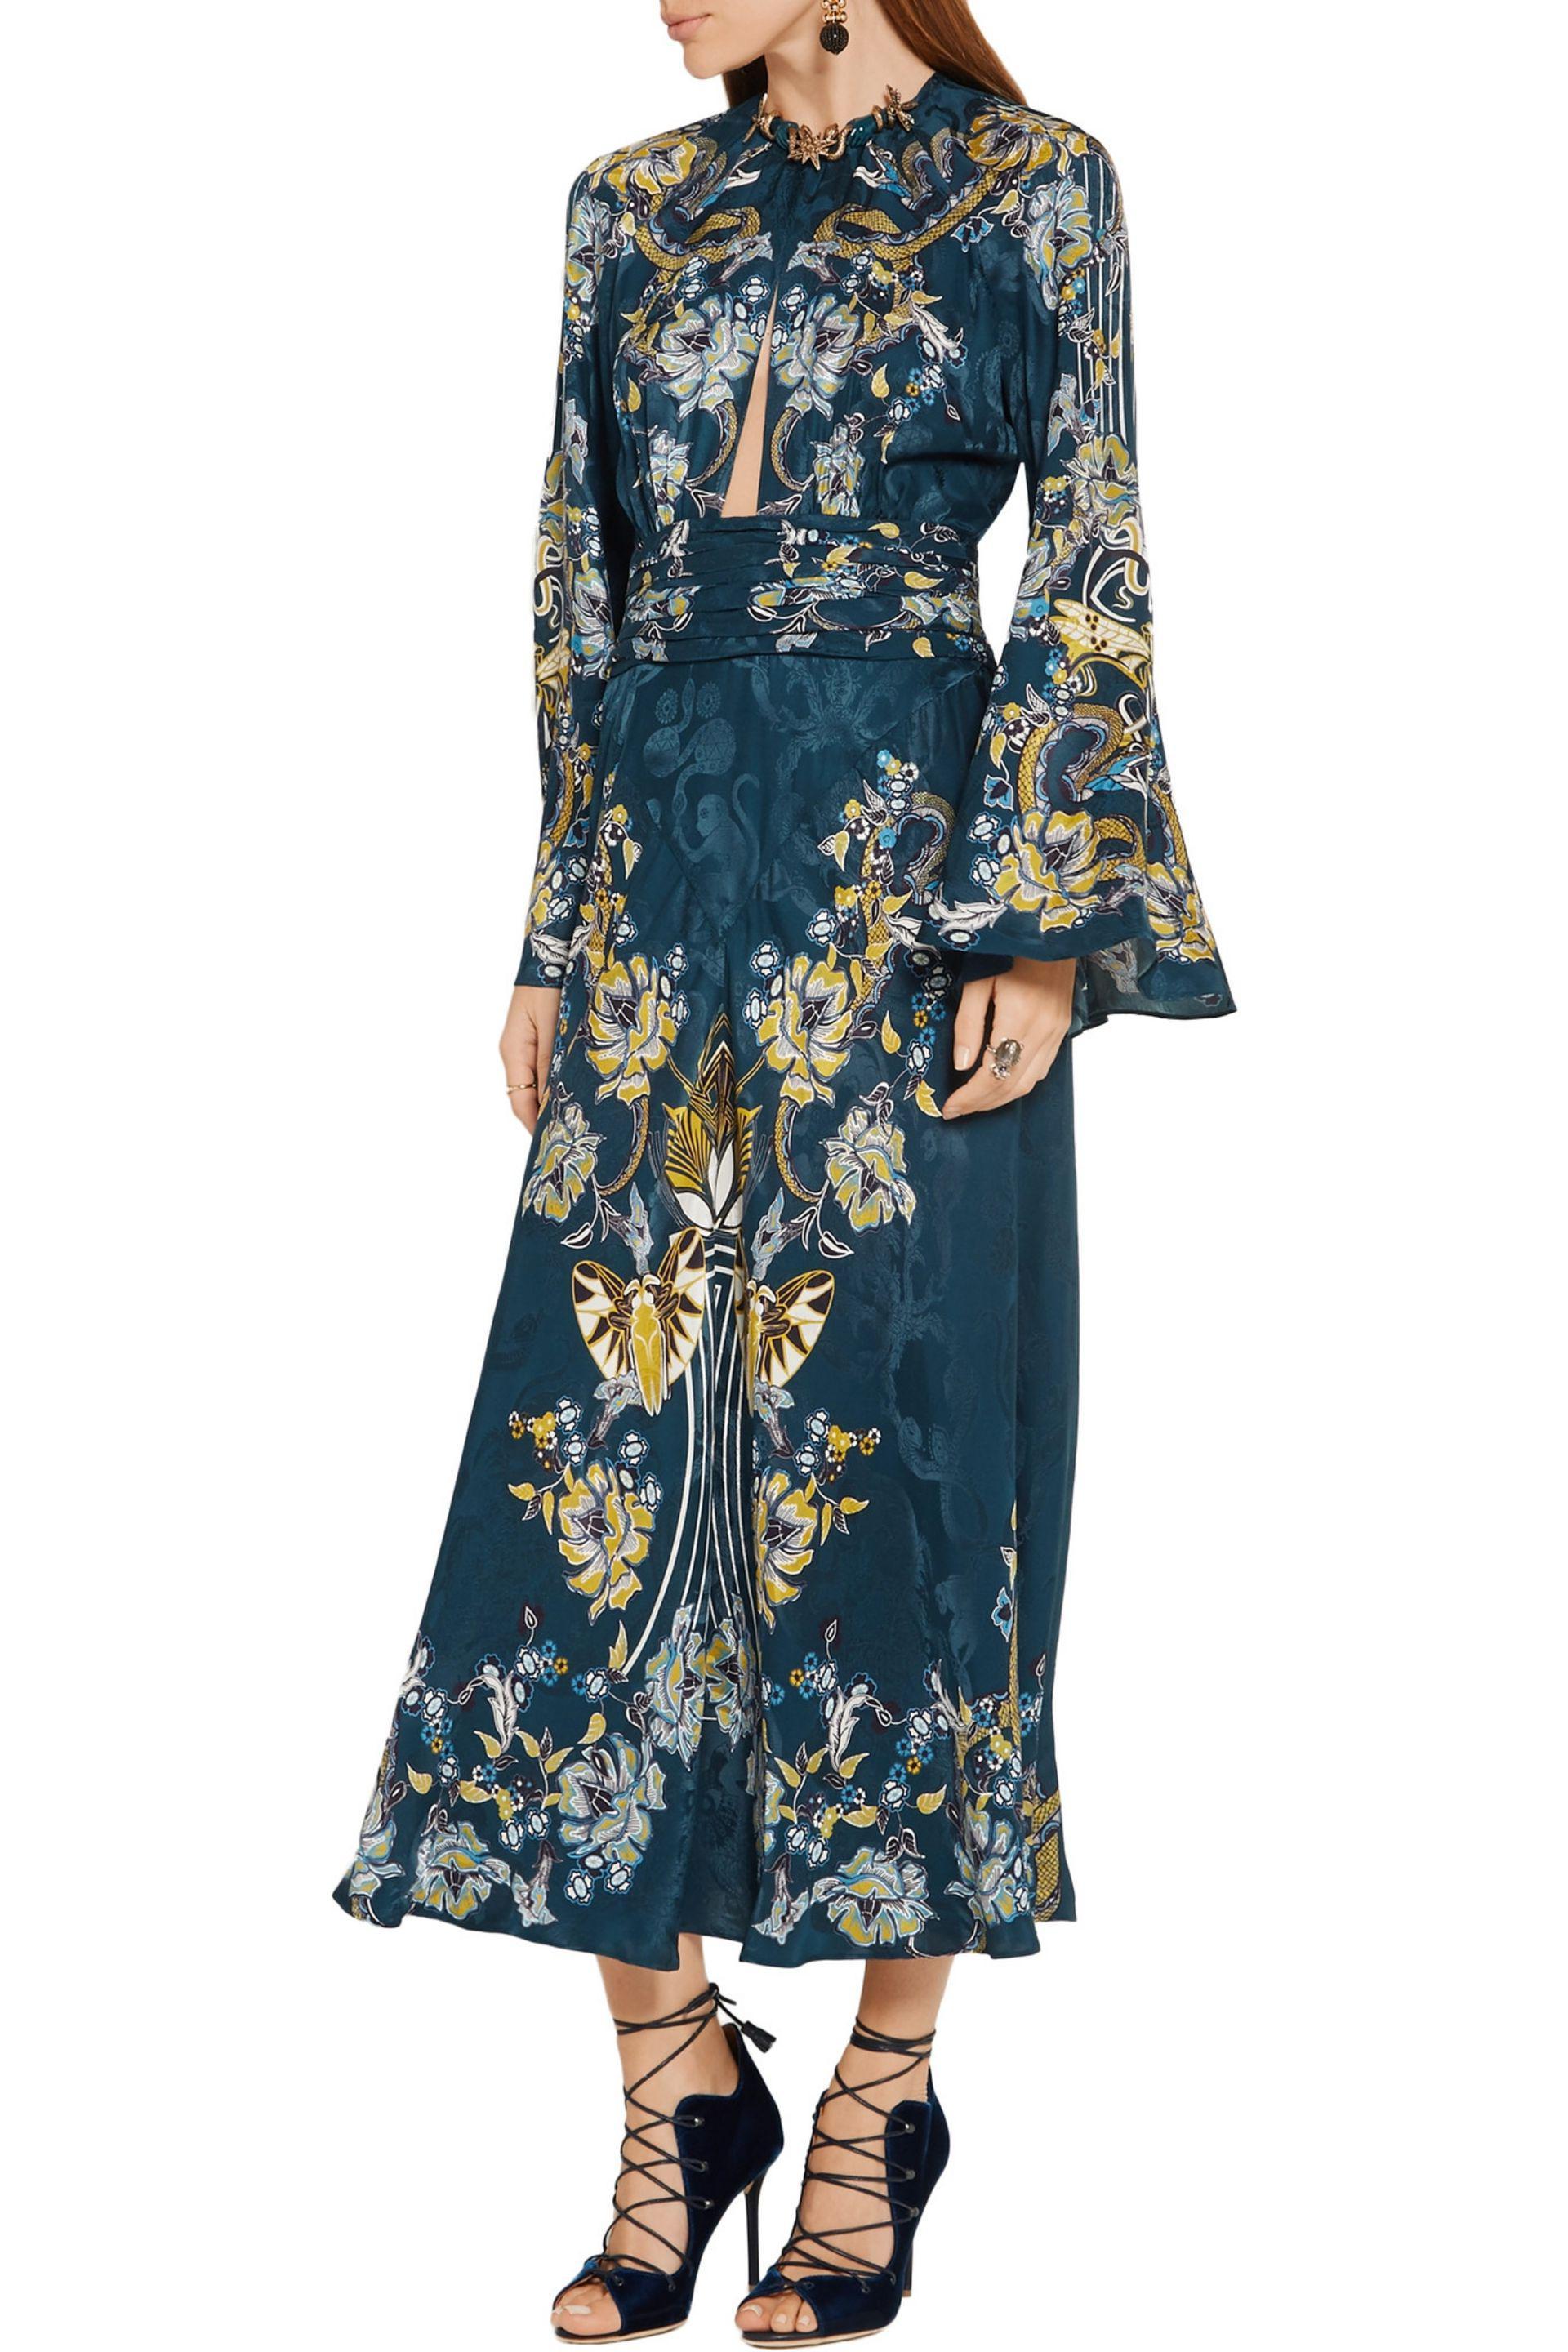 Roberto Cavalli 

Stunning gown with embellishments around the neck.

52% viscose , 48% silk
Made in Italy
Unlined
Front and back keyhole with button closures
Engraved metal charm detail at neckline
Hidden back zip closure
Bell sleeves with slit